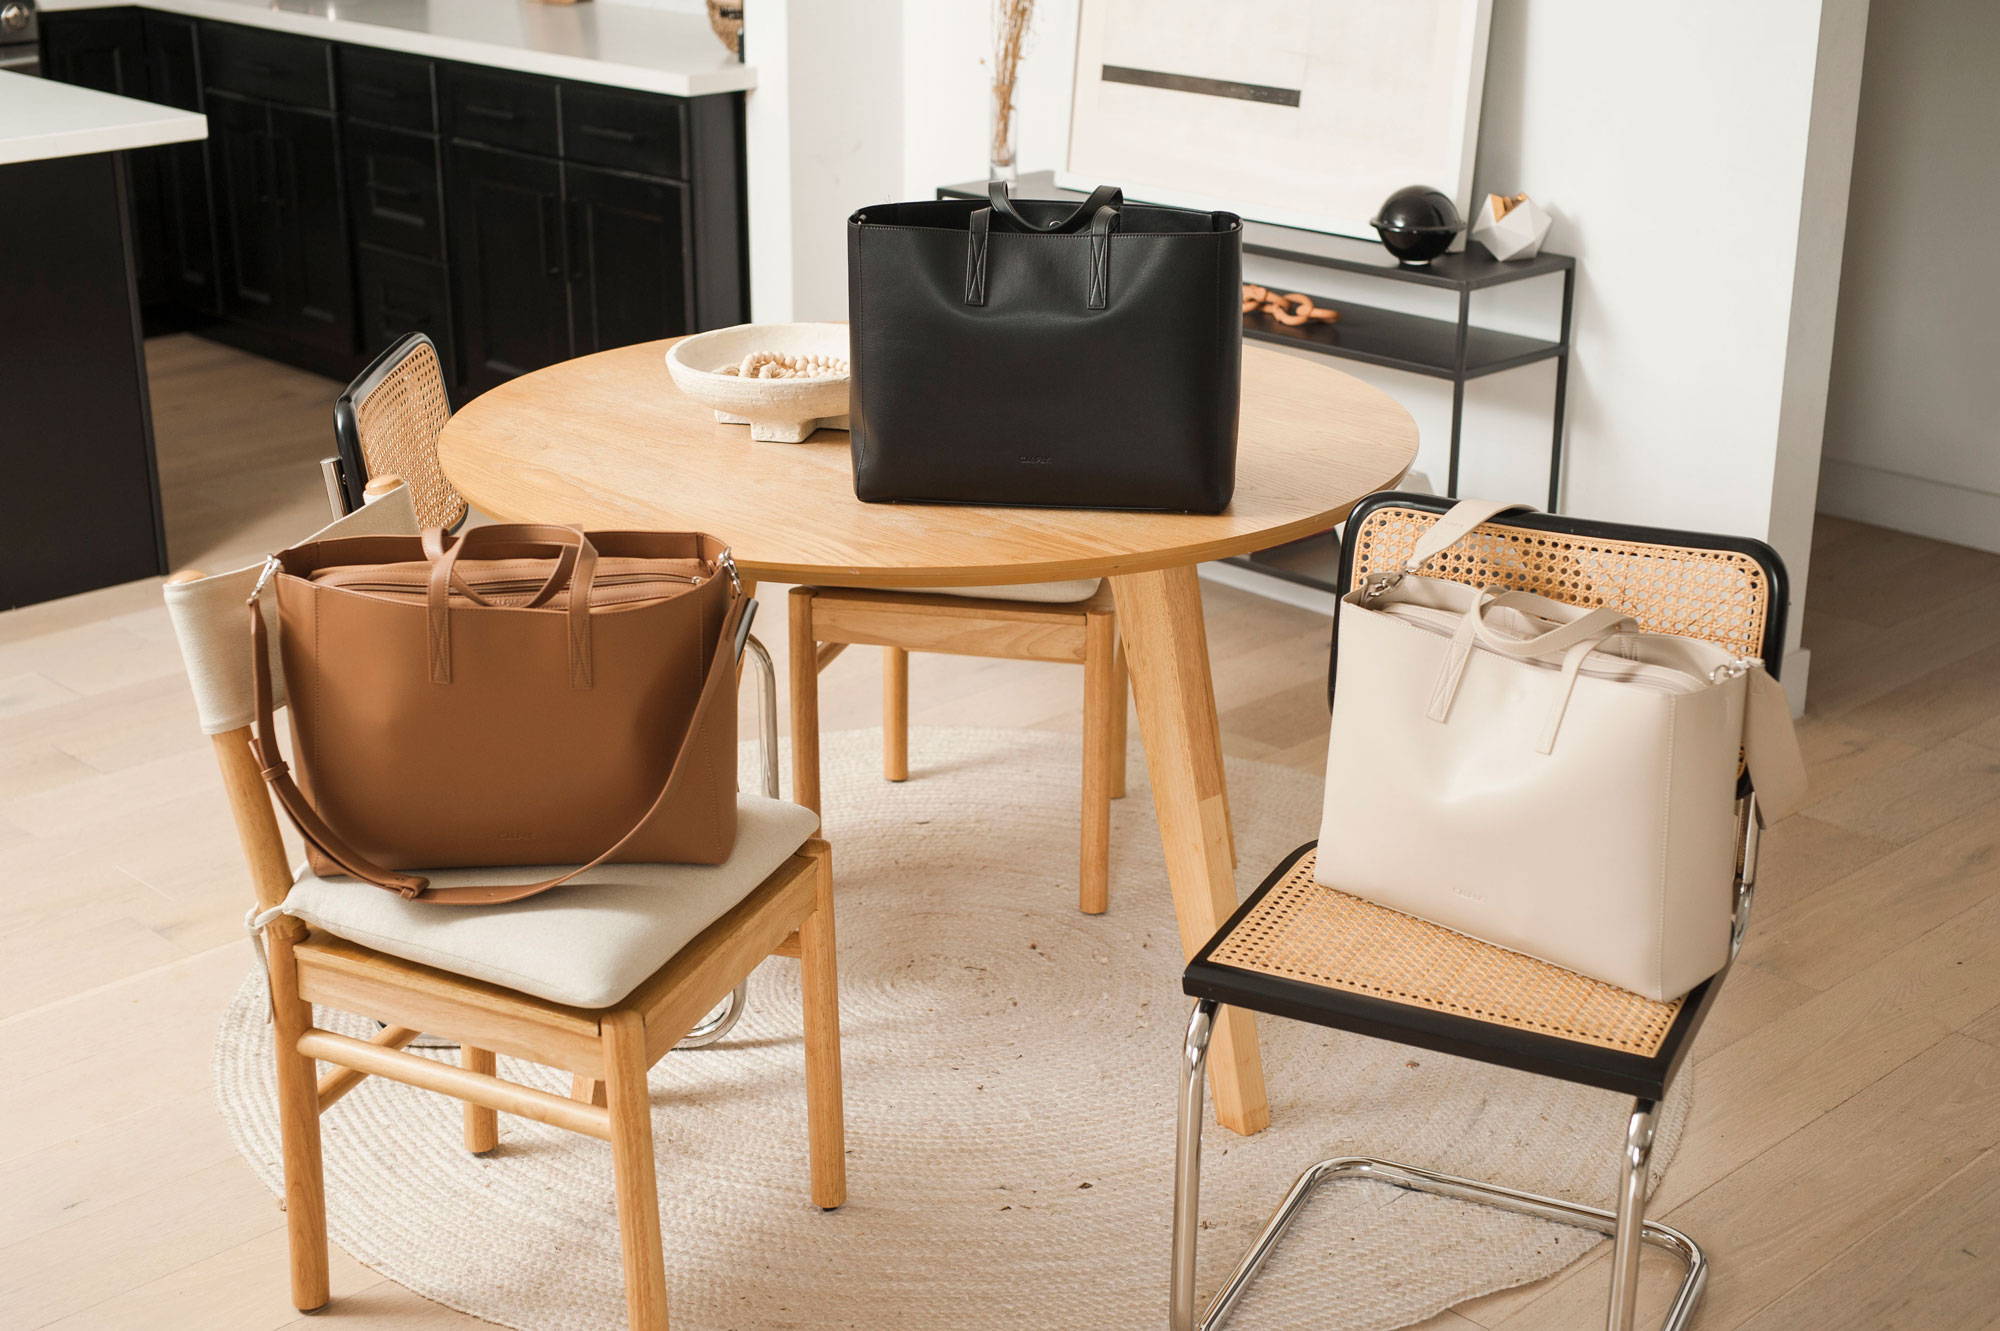 CALPAK Haven Laptop Tote in Toffee, Birch and Black.